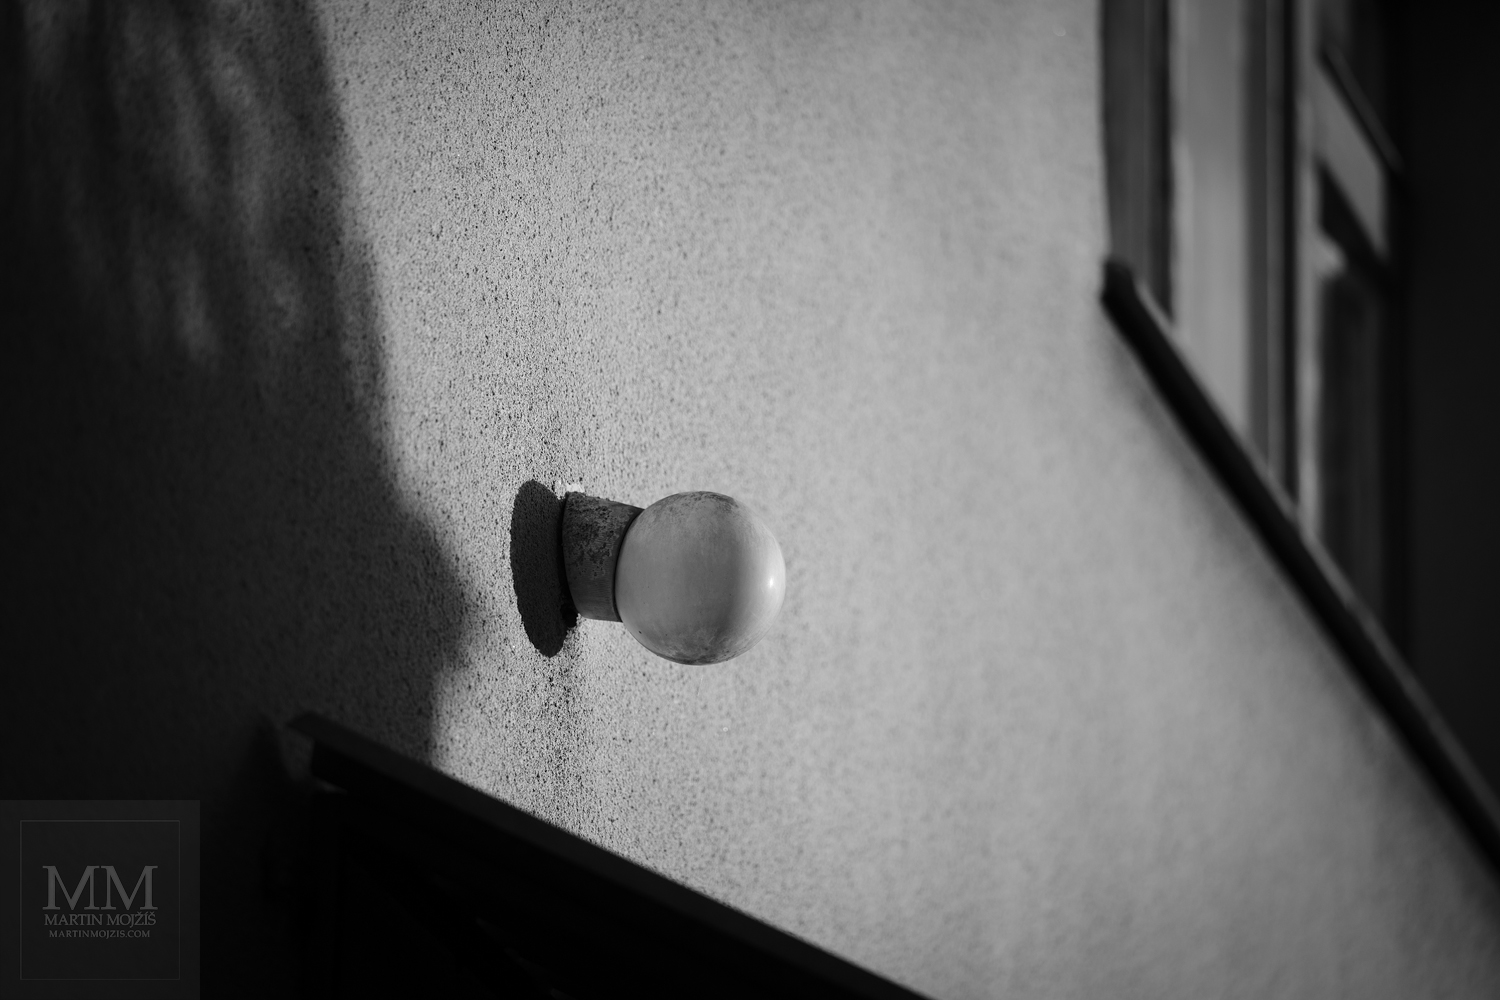 A lamp on a wall of a house in the light of the sun's rays. Fine art black and white photograph LAMP AND SUN, photographed by Martin Mojzis.